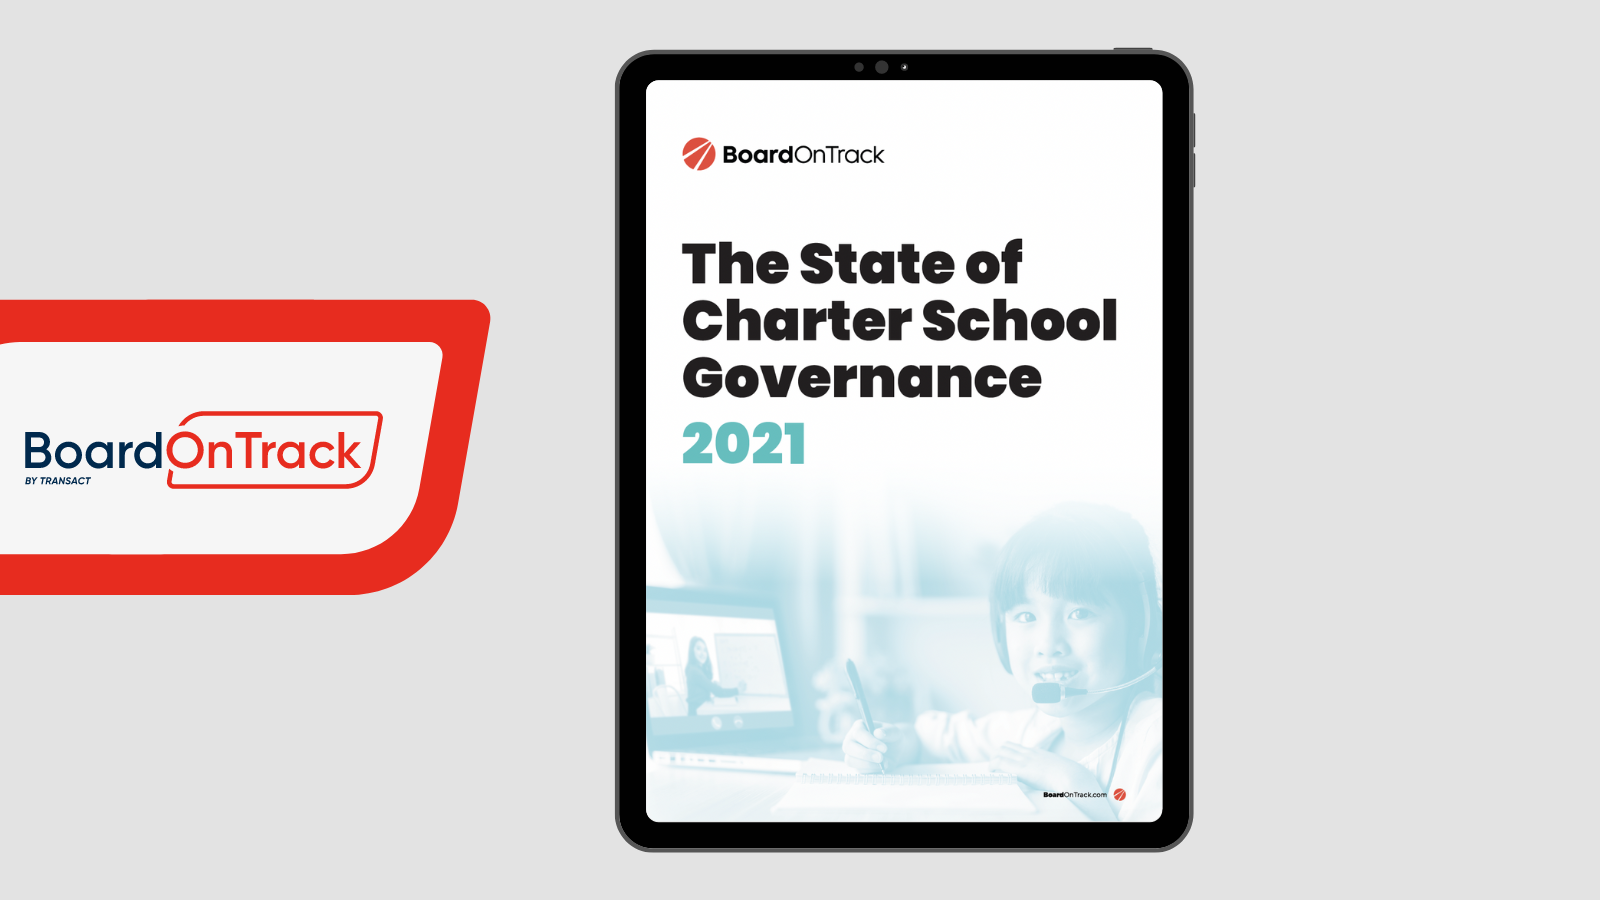 The State of Charter School Governance: 2021